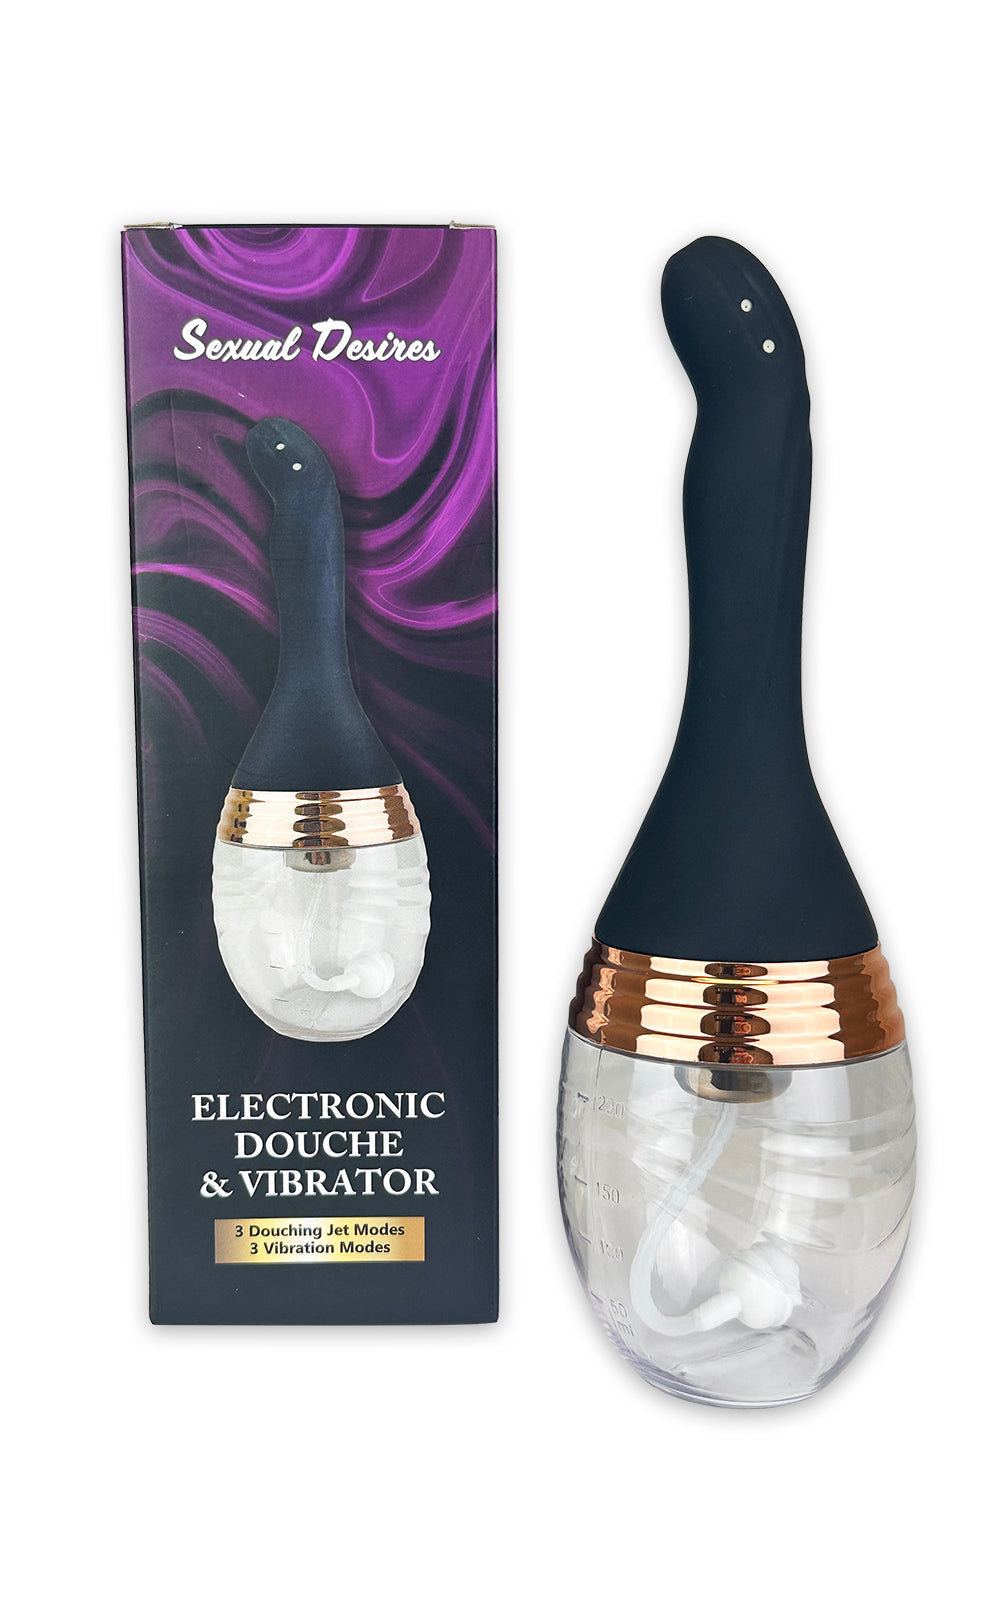 Electronic Douche and Vibrator